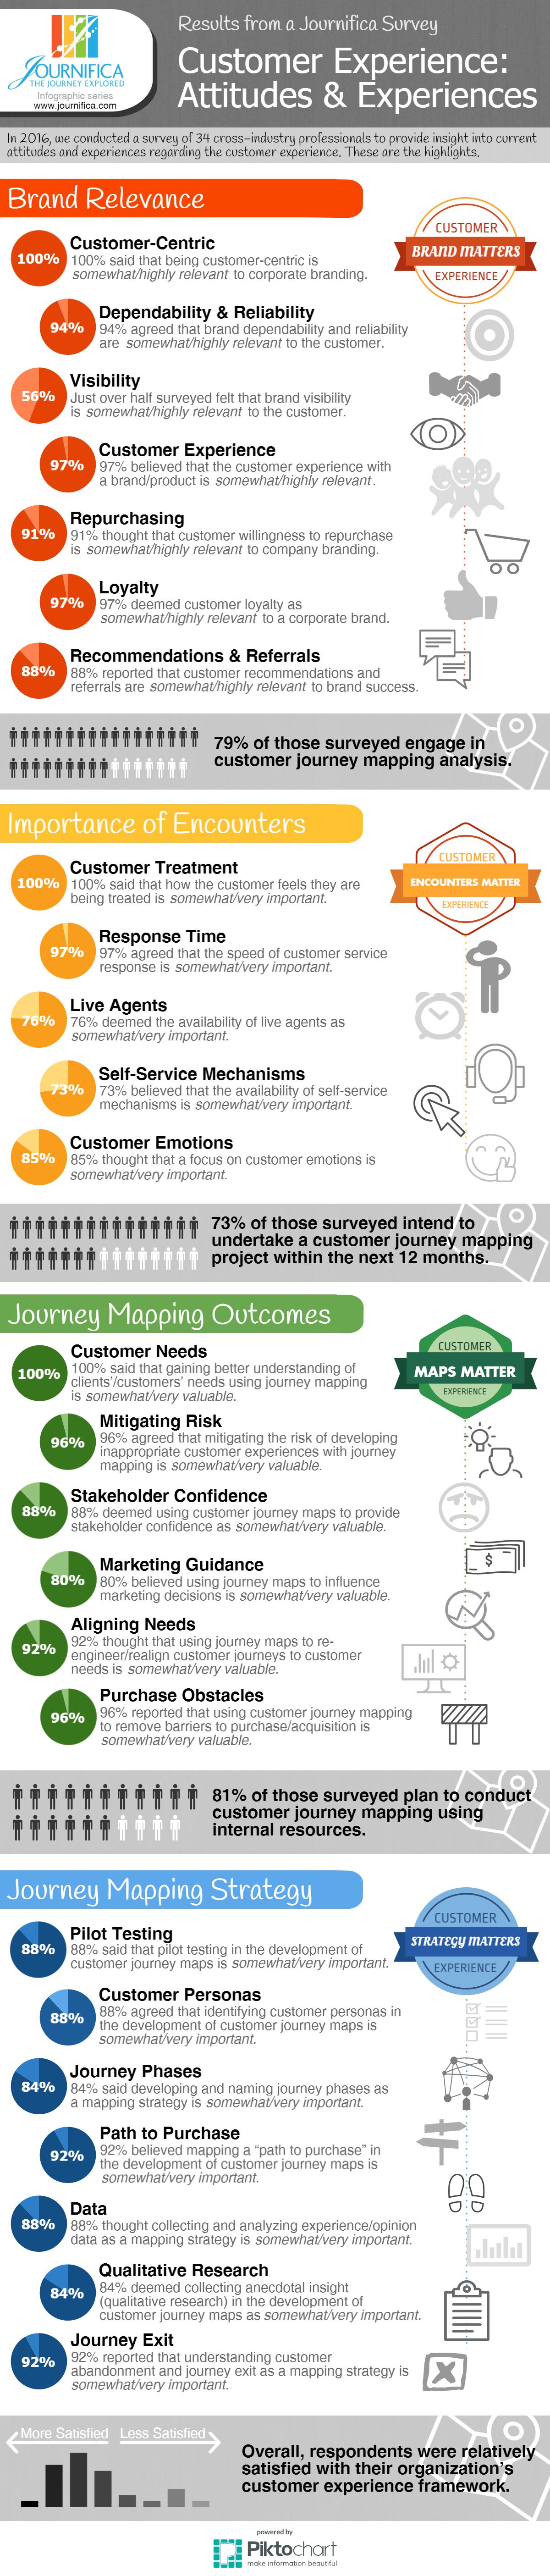 infographic on customer experience management